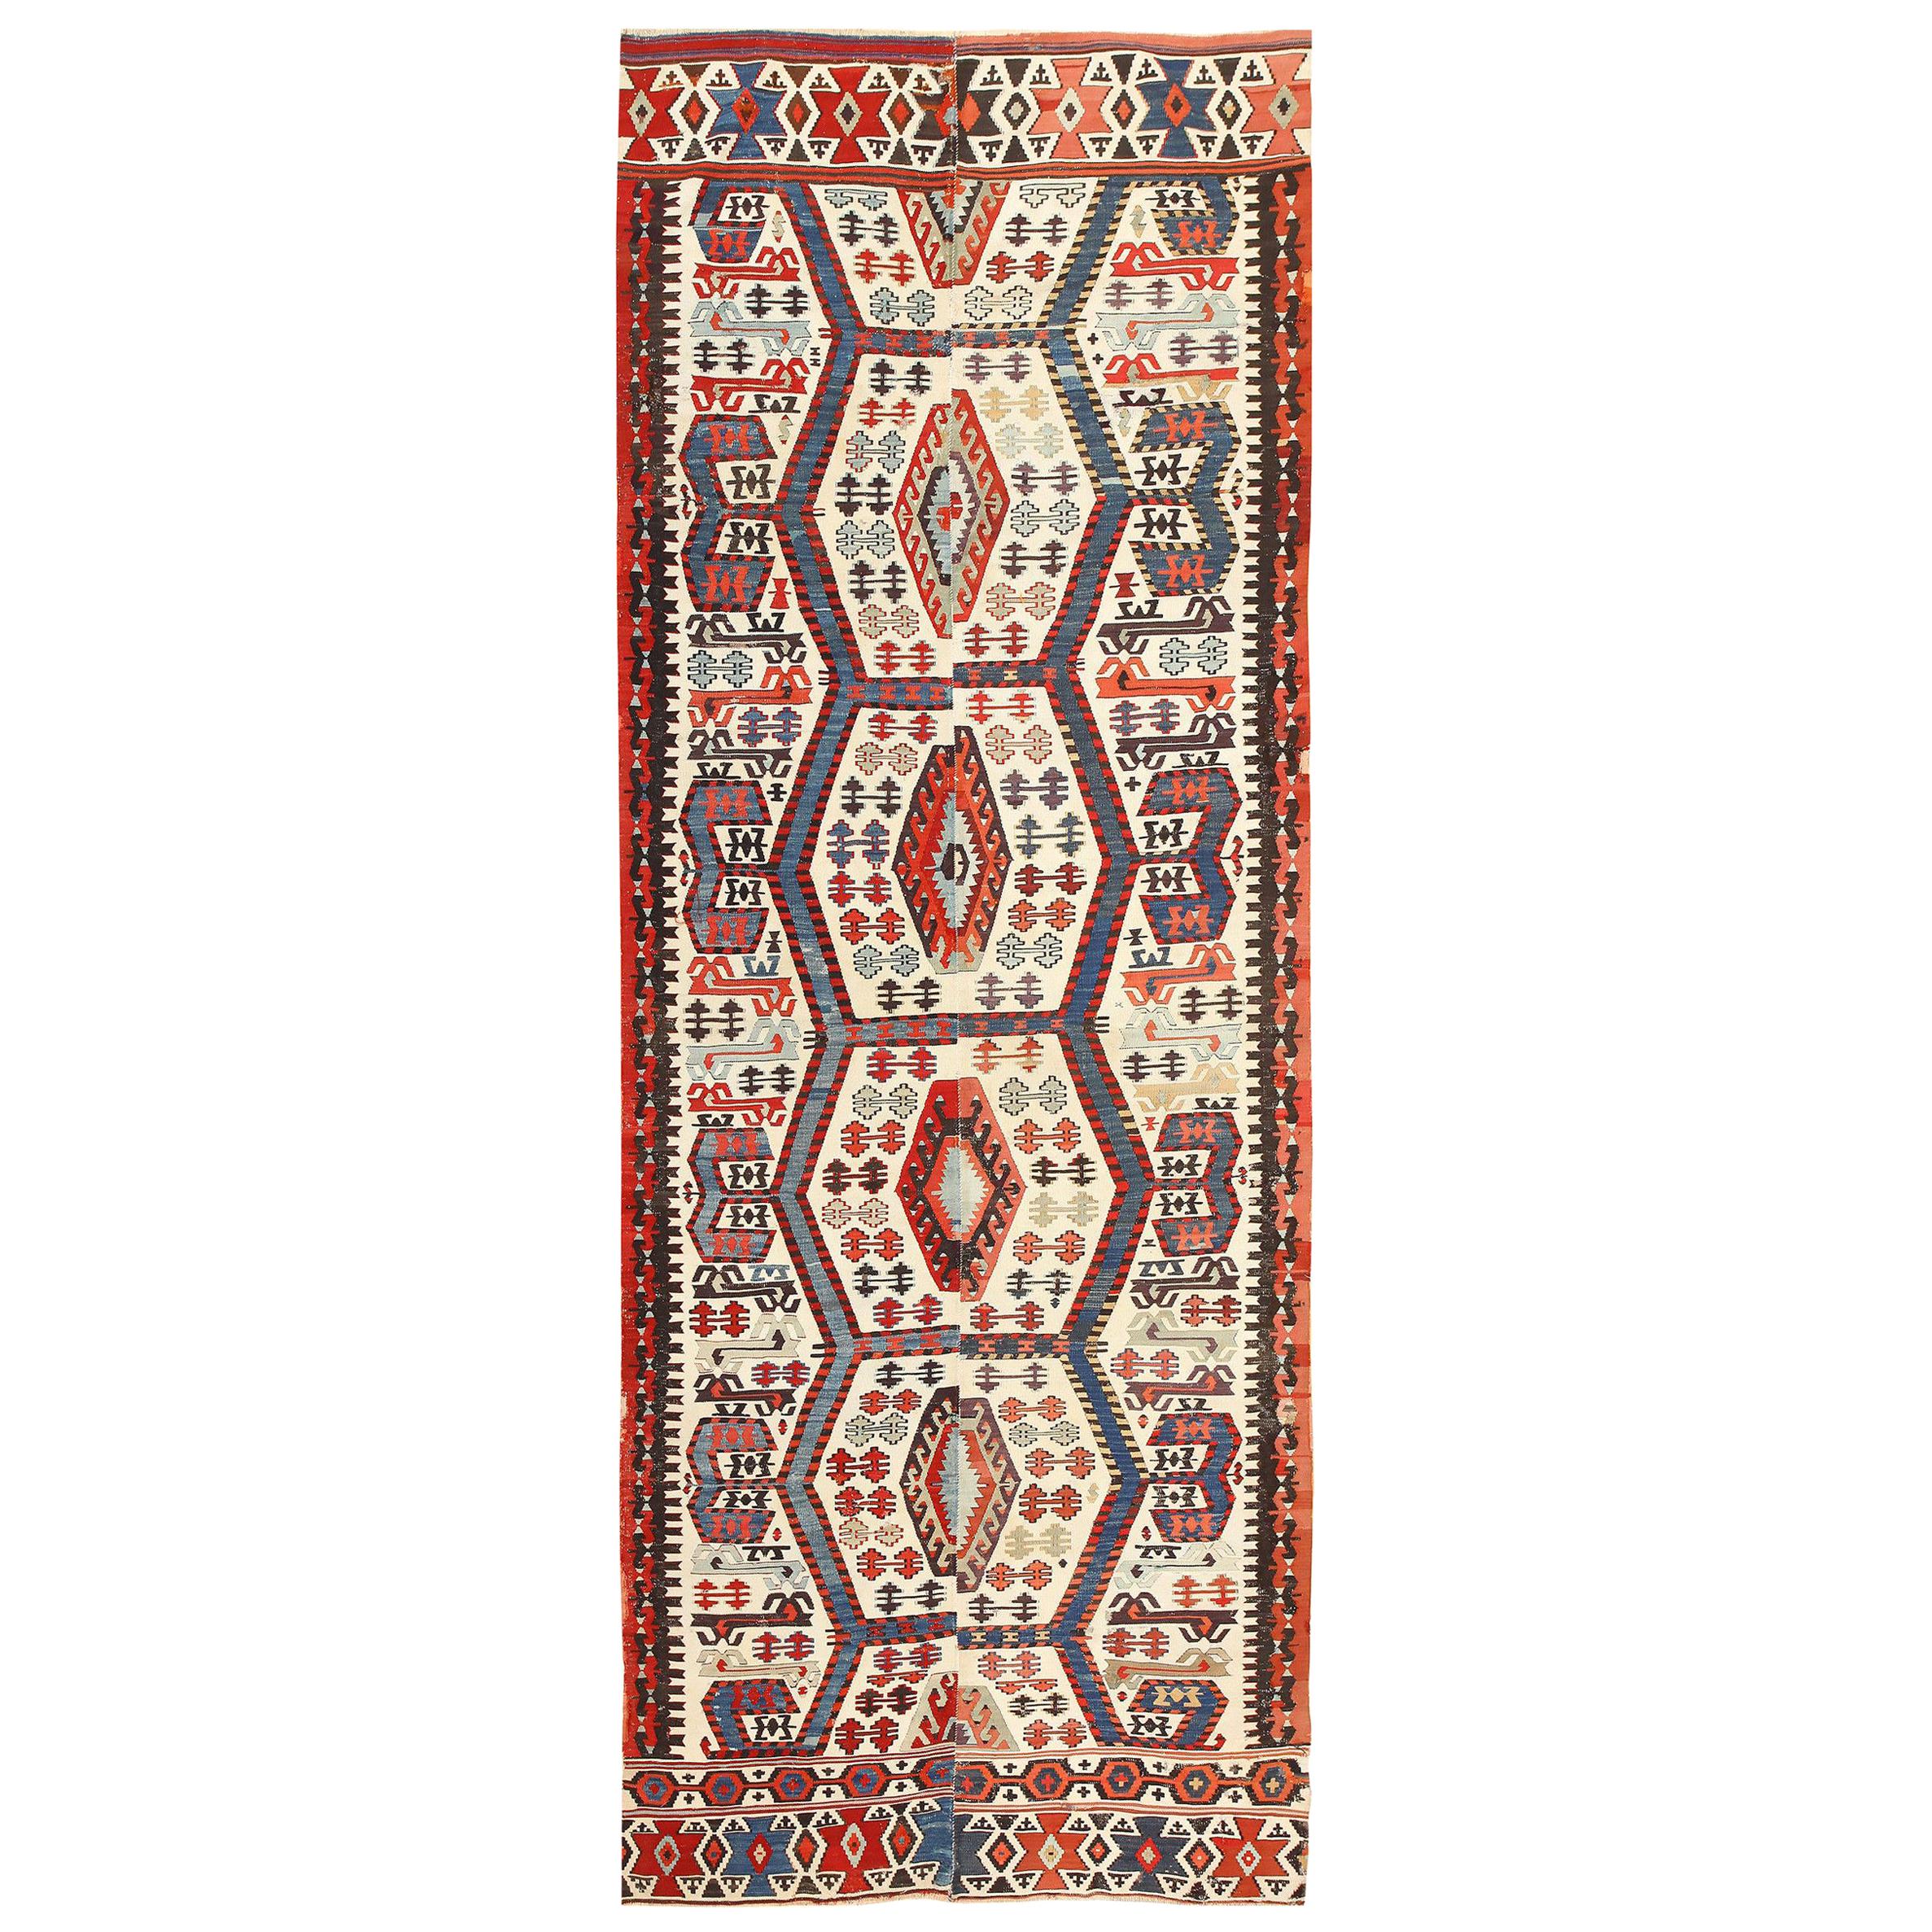 Nazmiyal Collection Antique Turkish Kilim. Size: 5 ft x 12 ft 8 in